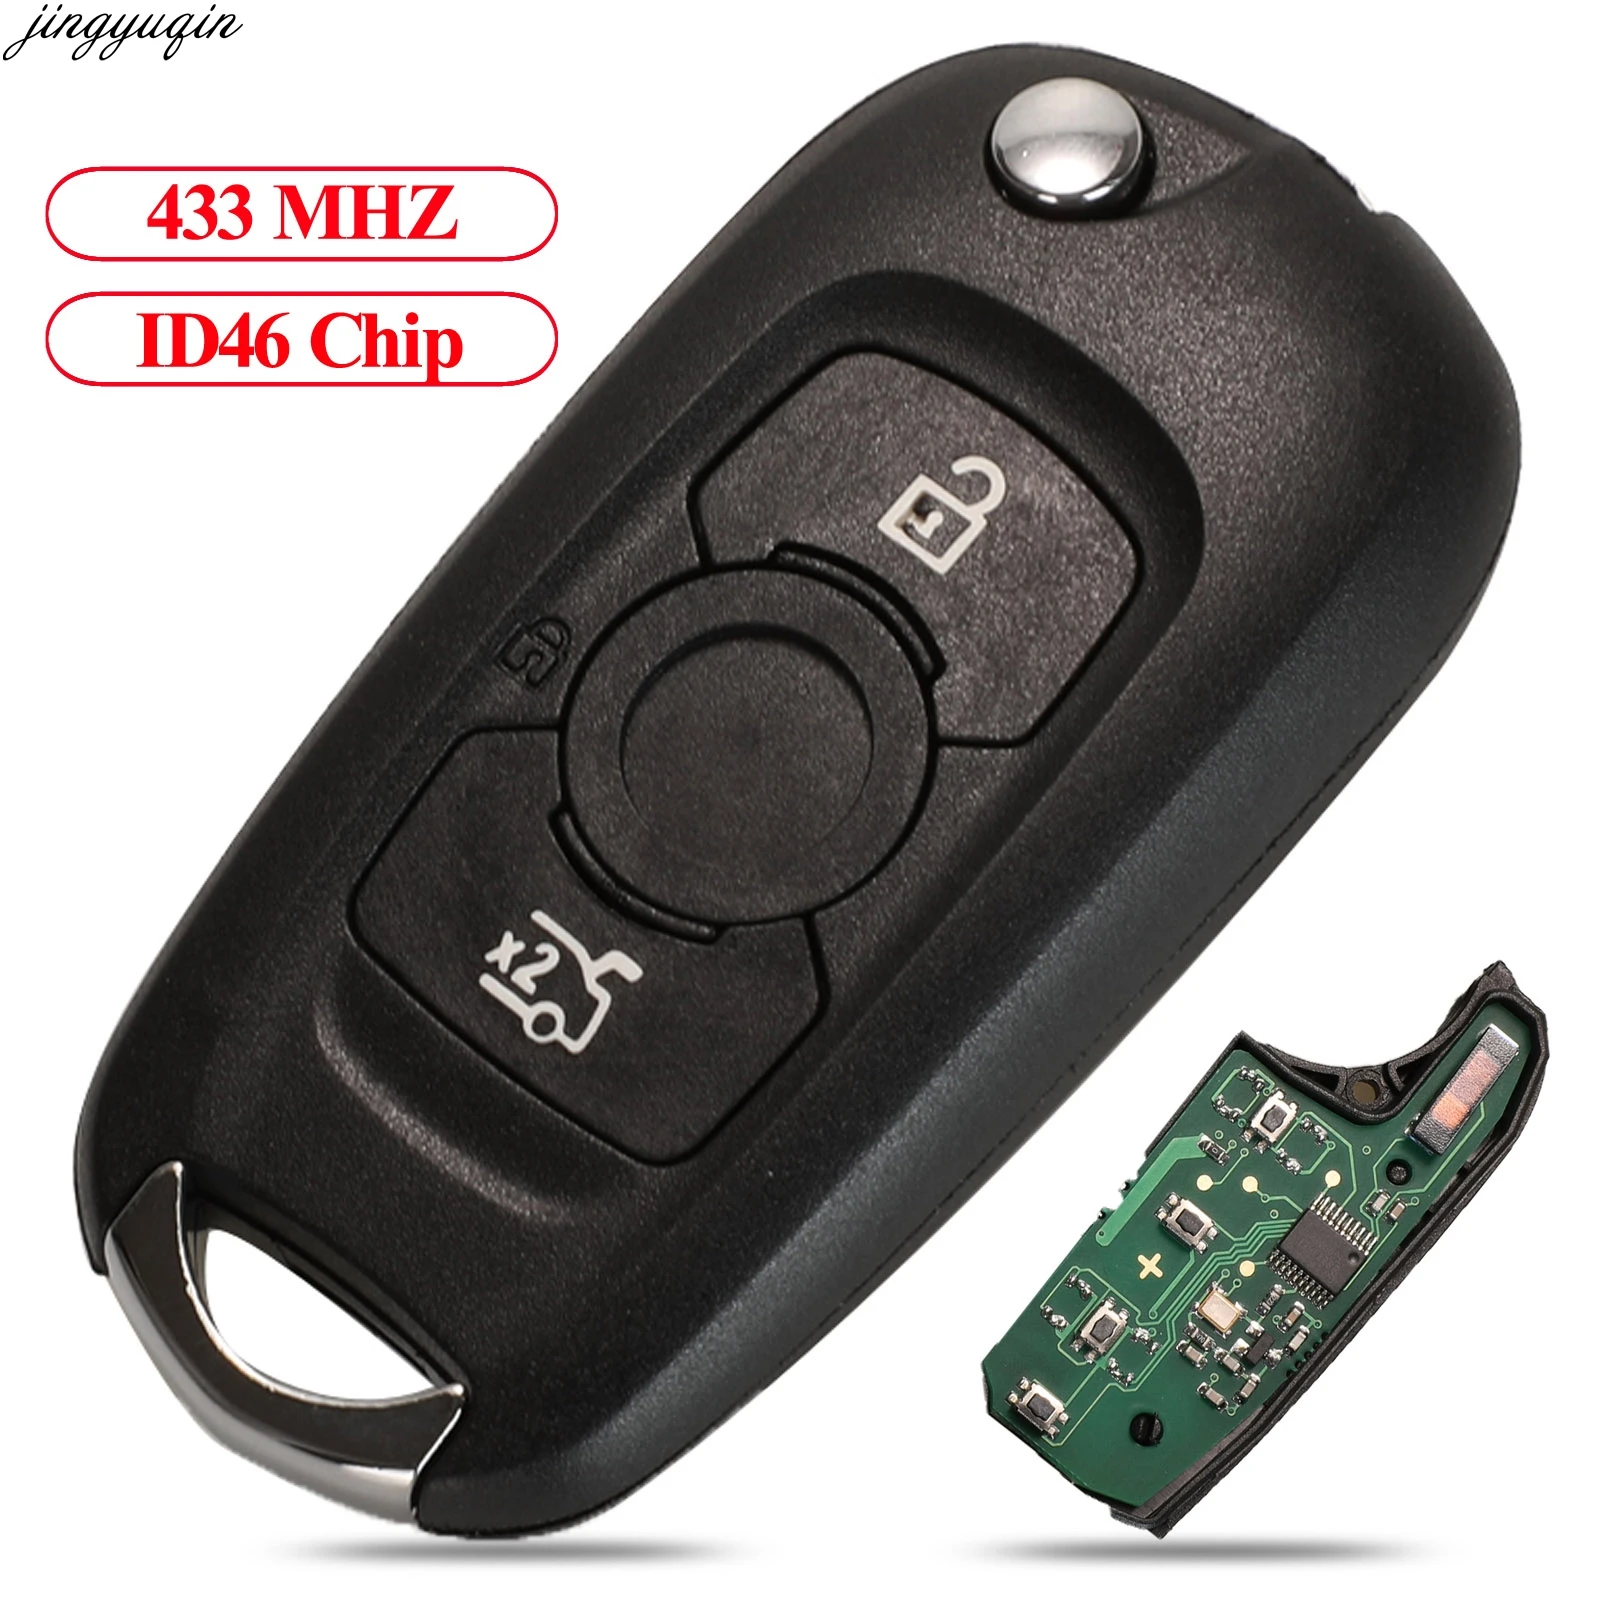 

Jingyuqin Flip Remote Control Car Key 315MHz ID46 For Buick Verano after 2015 Regal Excelle GT/Excelle XT LaCrosse 3 Button Fob